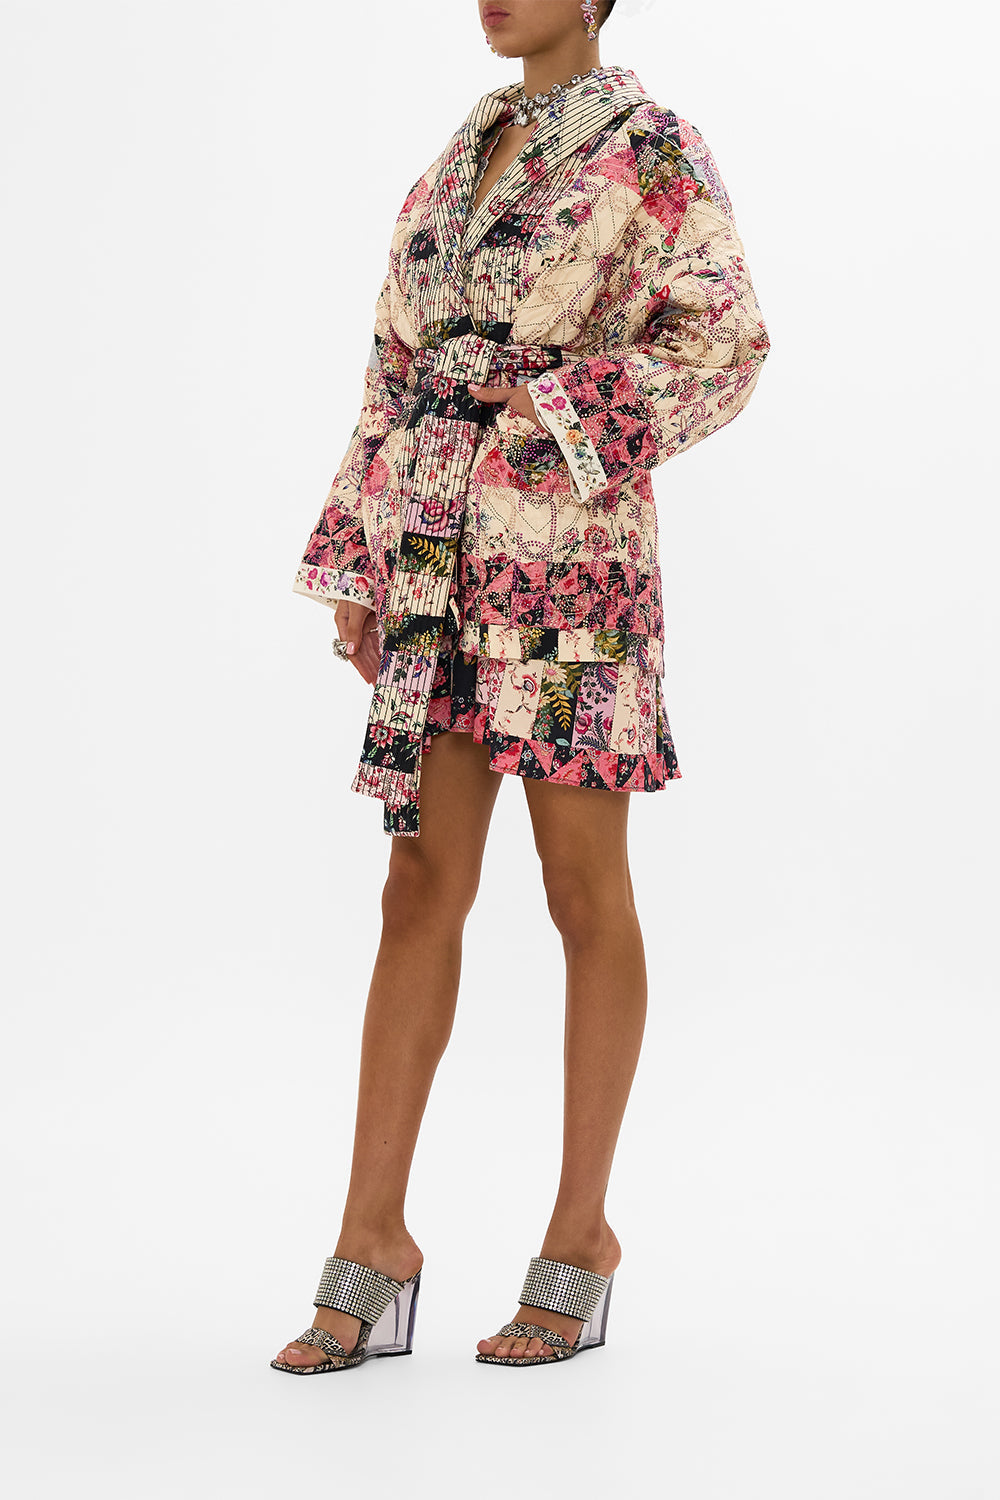 CAMILLA Floral Reversible Quilted Coat in Patchwork Poetry